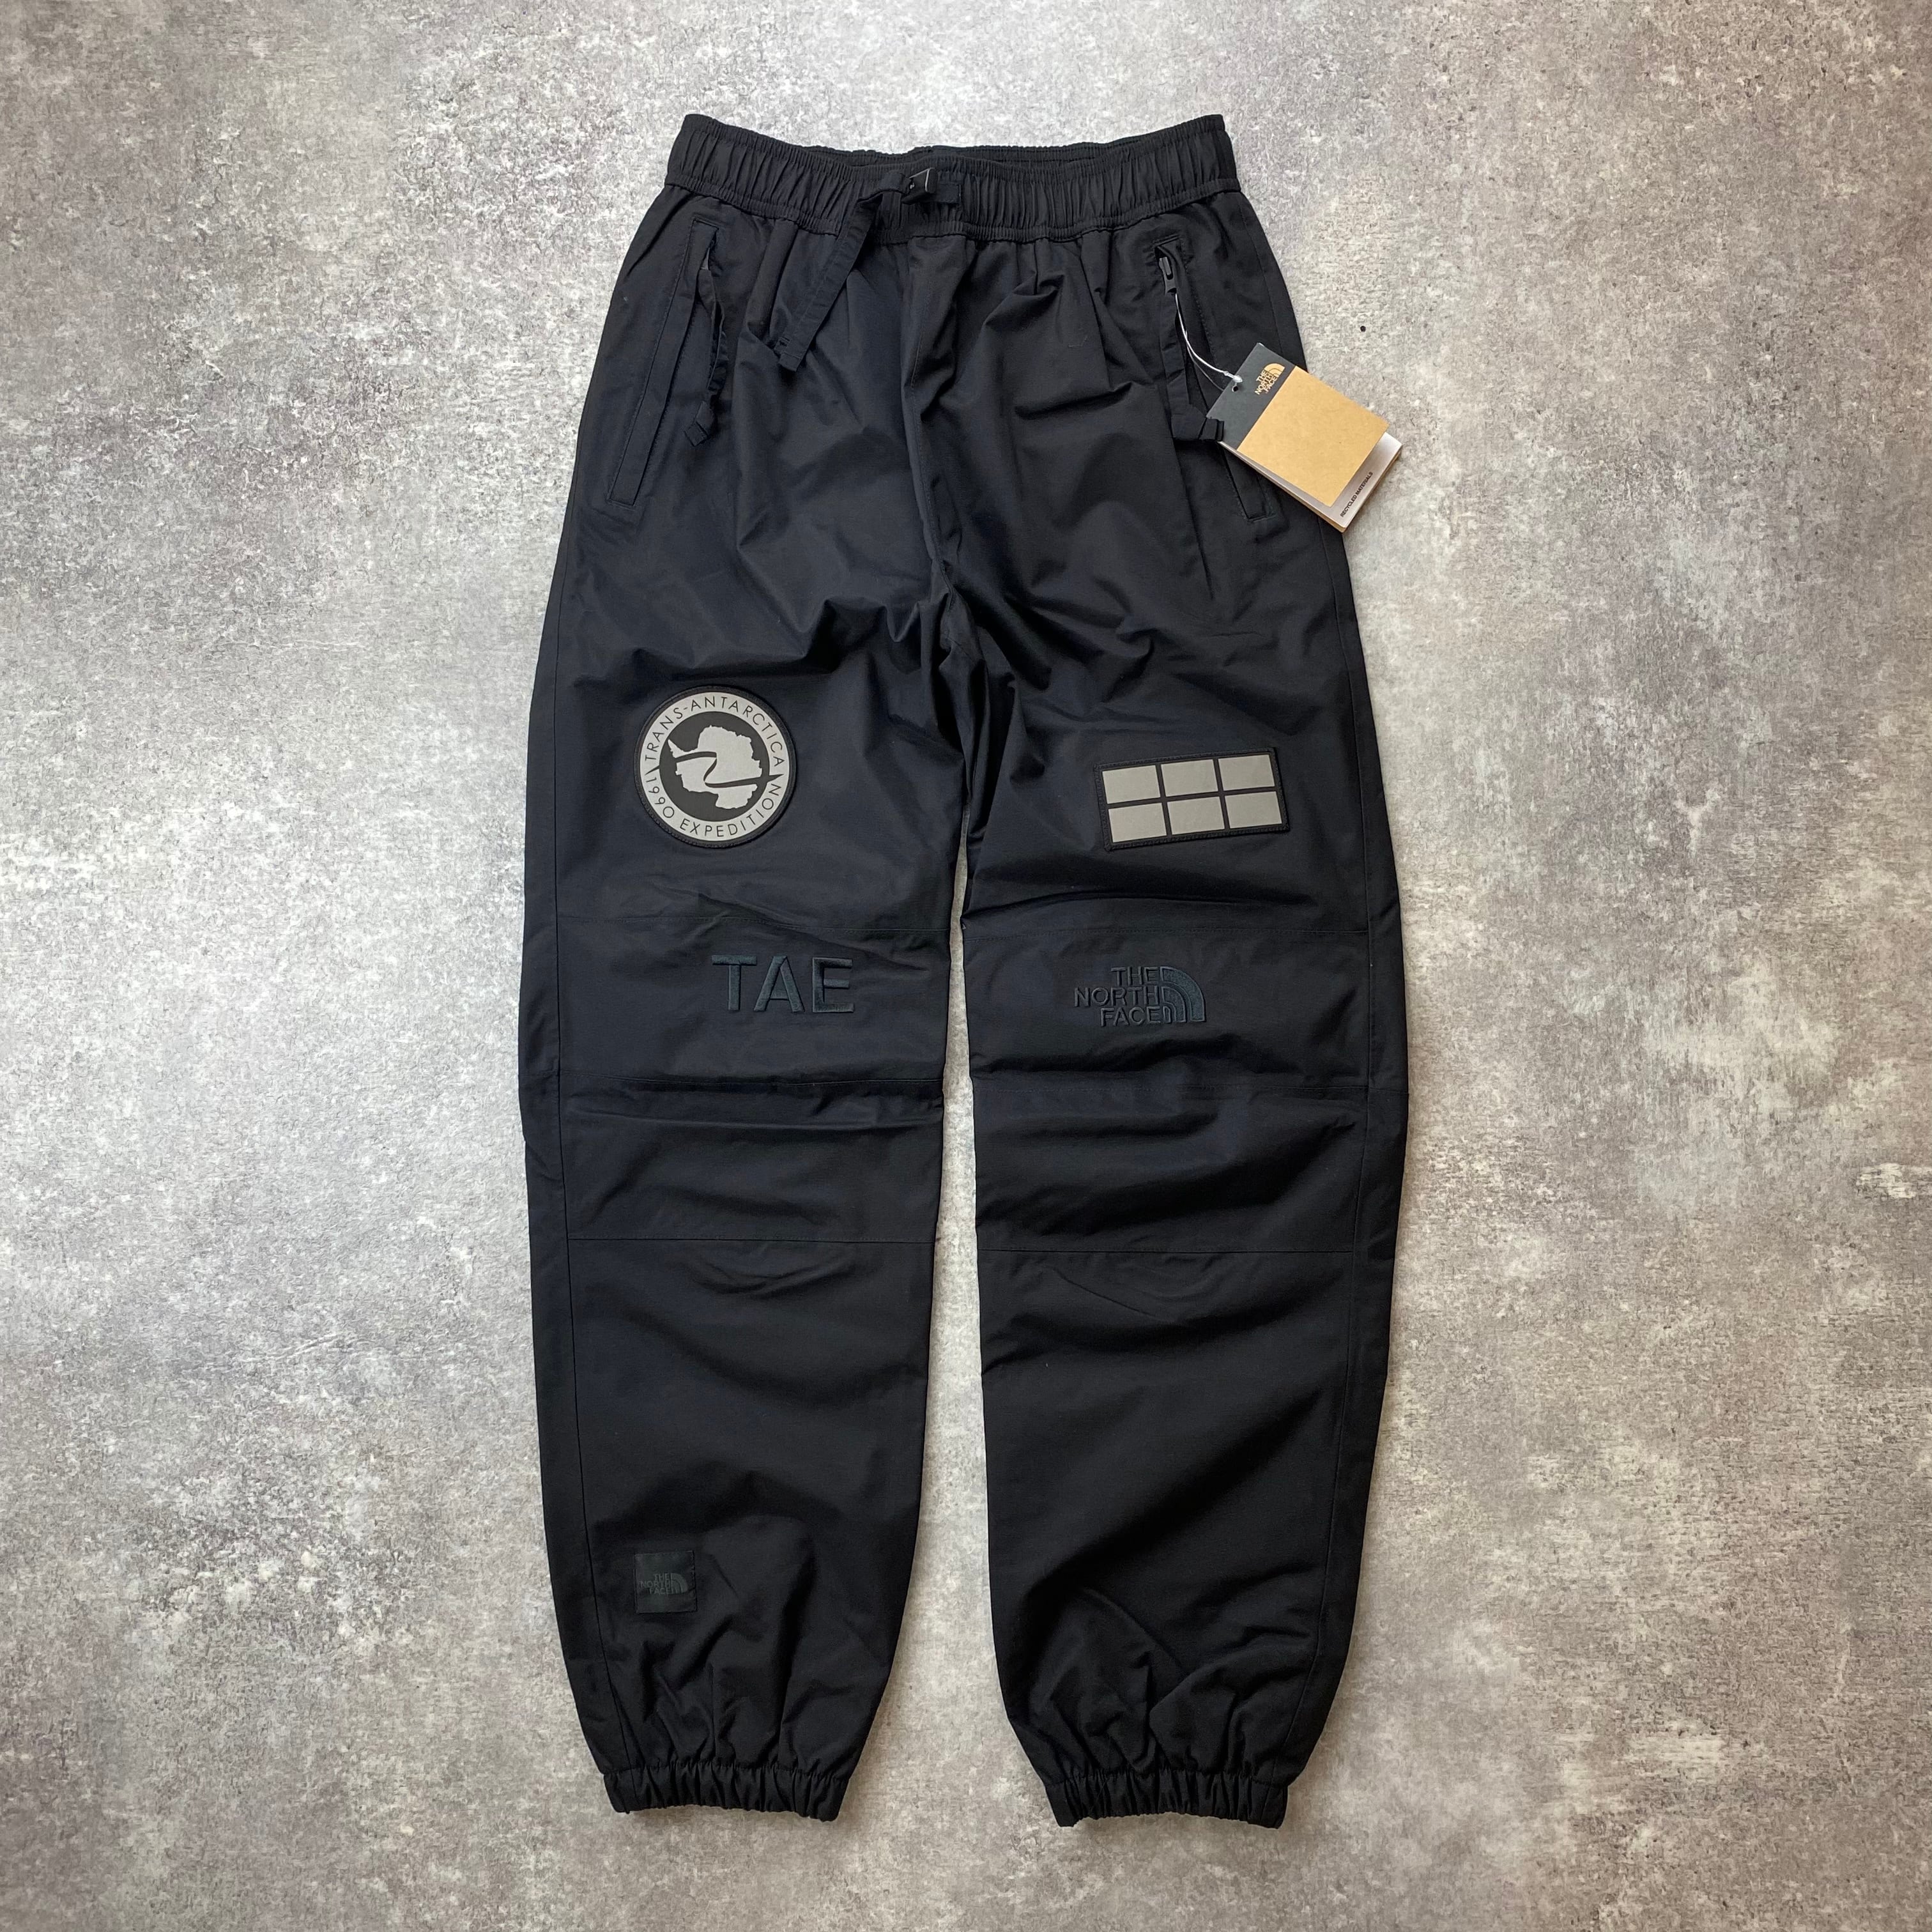 THE NORTH FACE / Men's Trans-Antarctica Expedition Pant / TNF